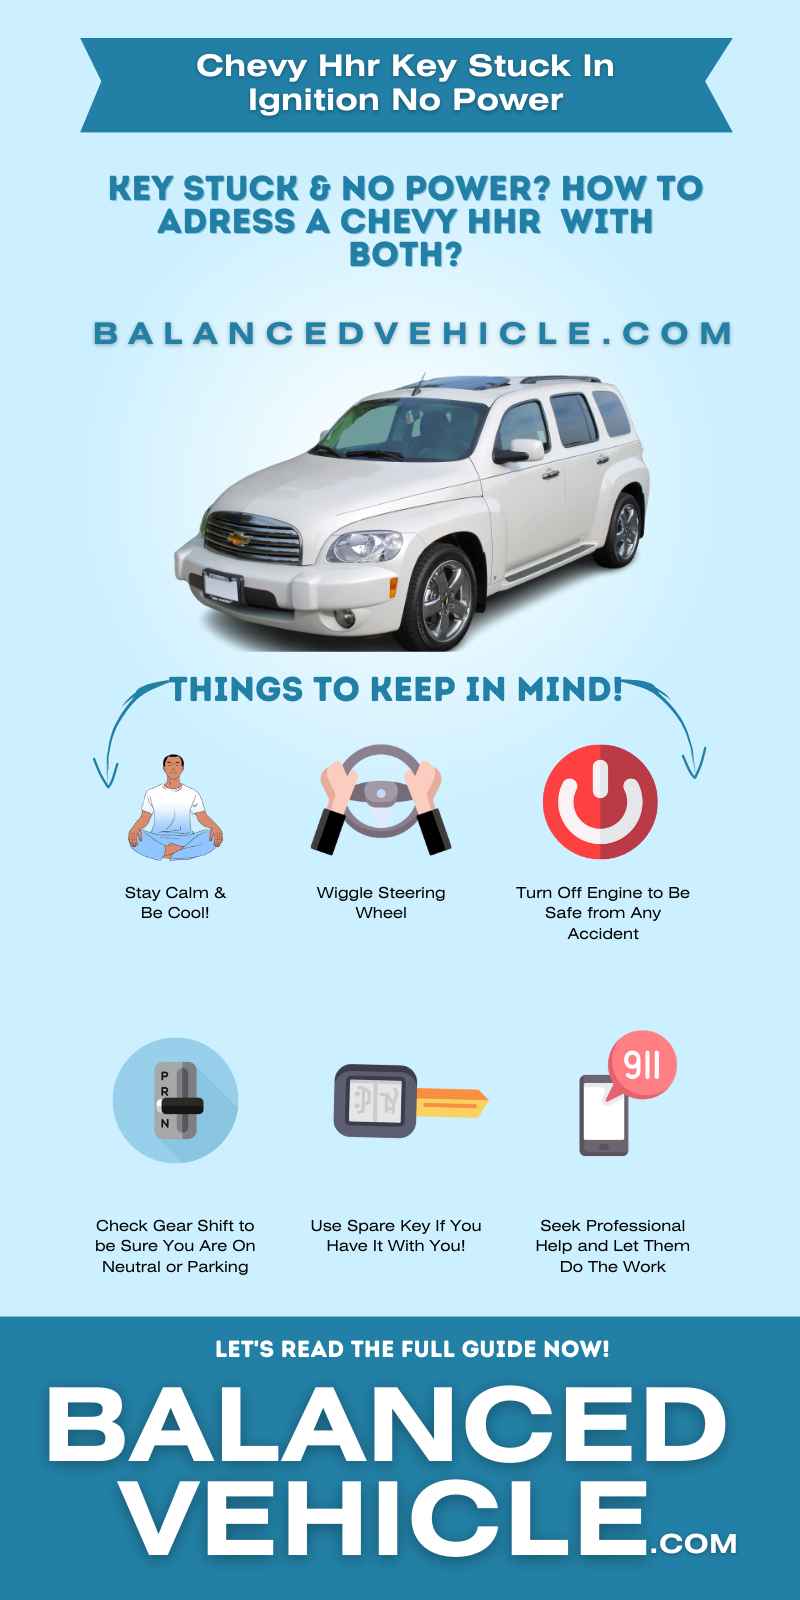 Chevy Hhr Key Stuck In Ignition No Power- Infographic 